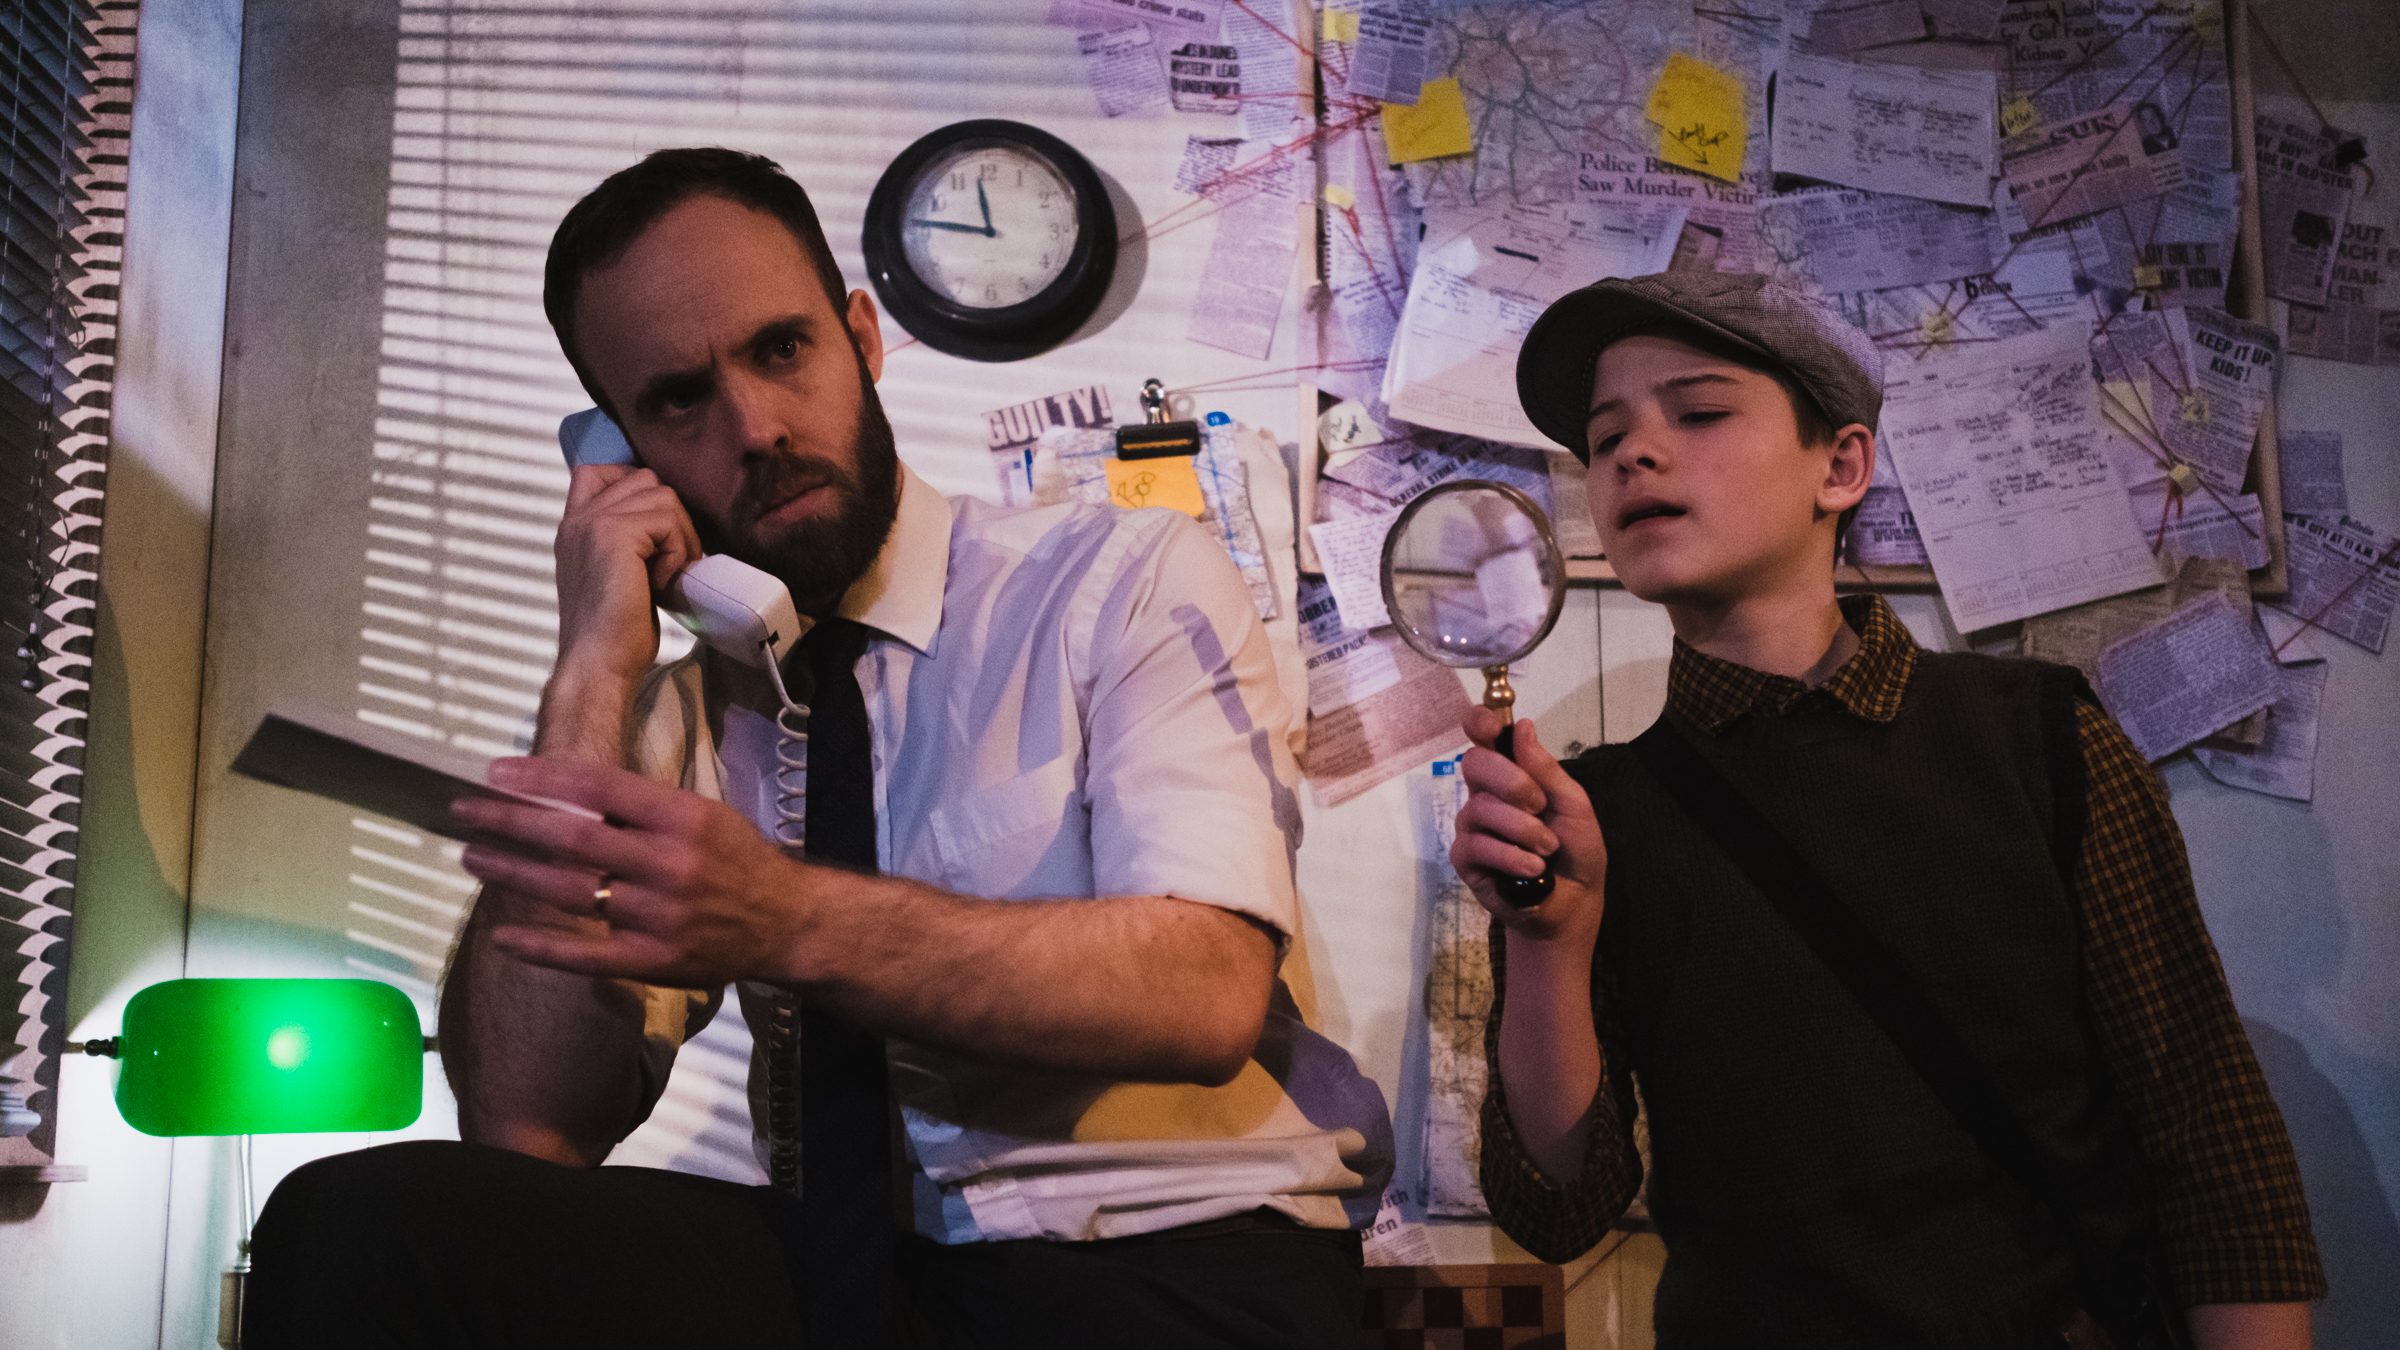 A dance theatre performance is taking place and it's set in the 1950s. It looks like something from film noir, there's a detective on the phone and a young boy next to him with a magnifying glass. The backdrop looks like a classic detective's office